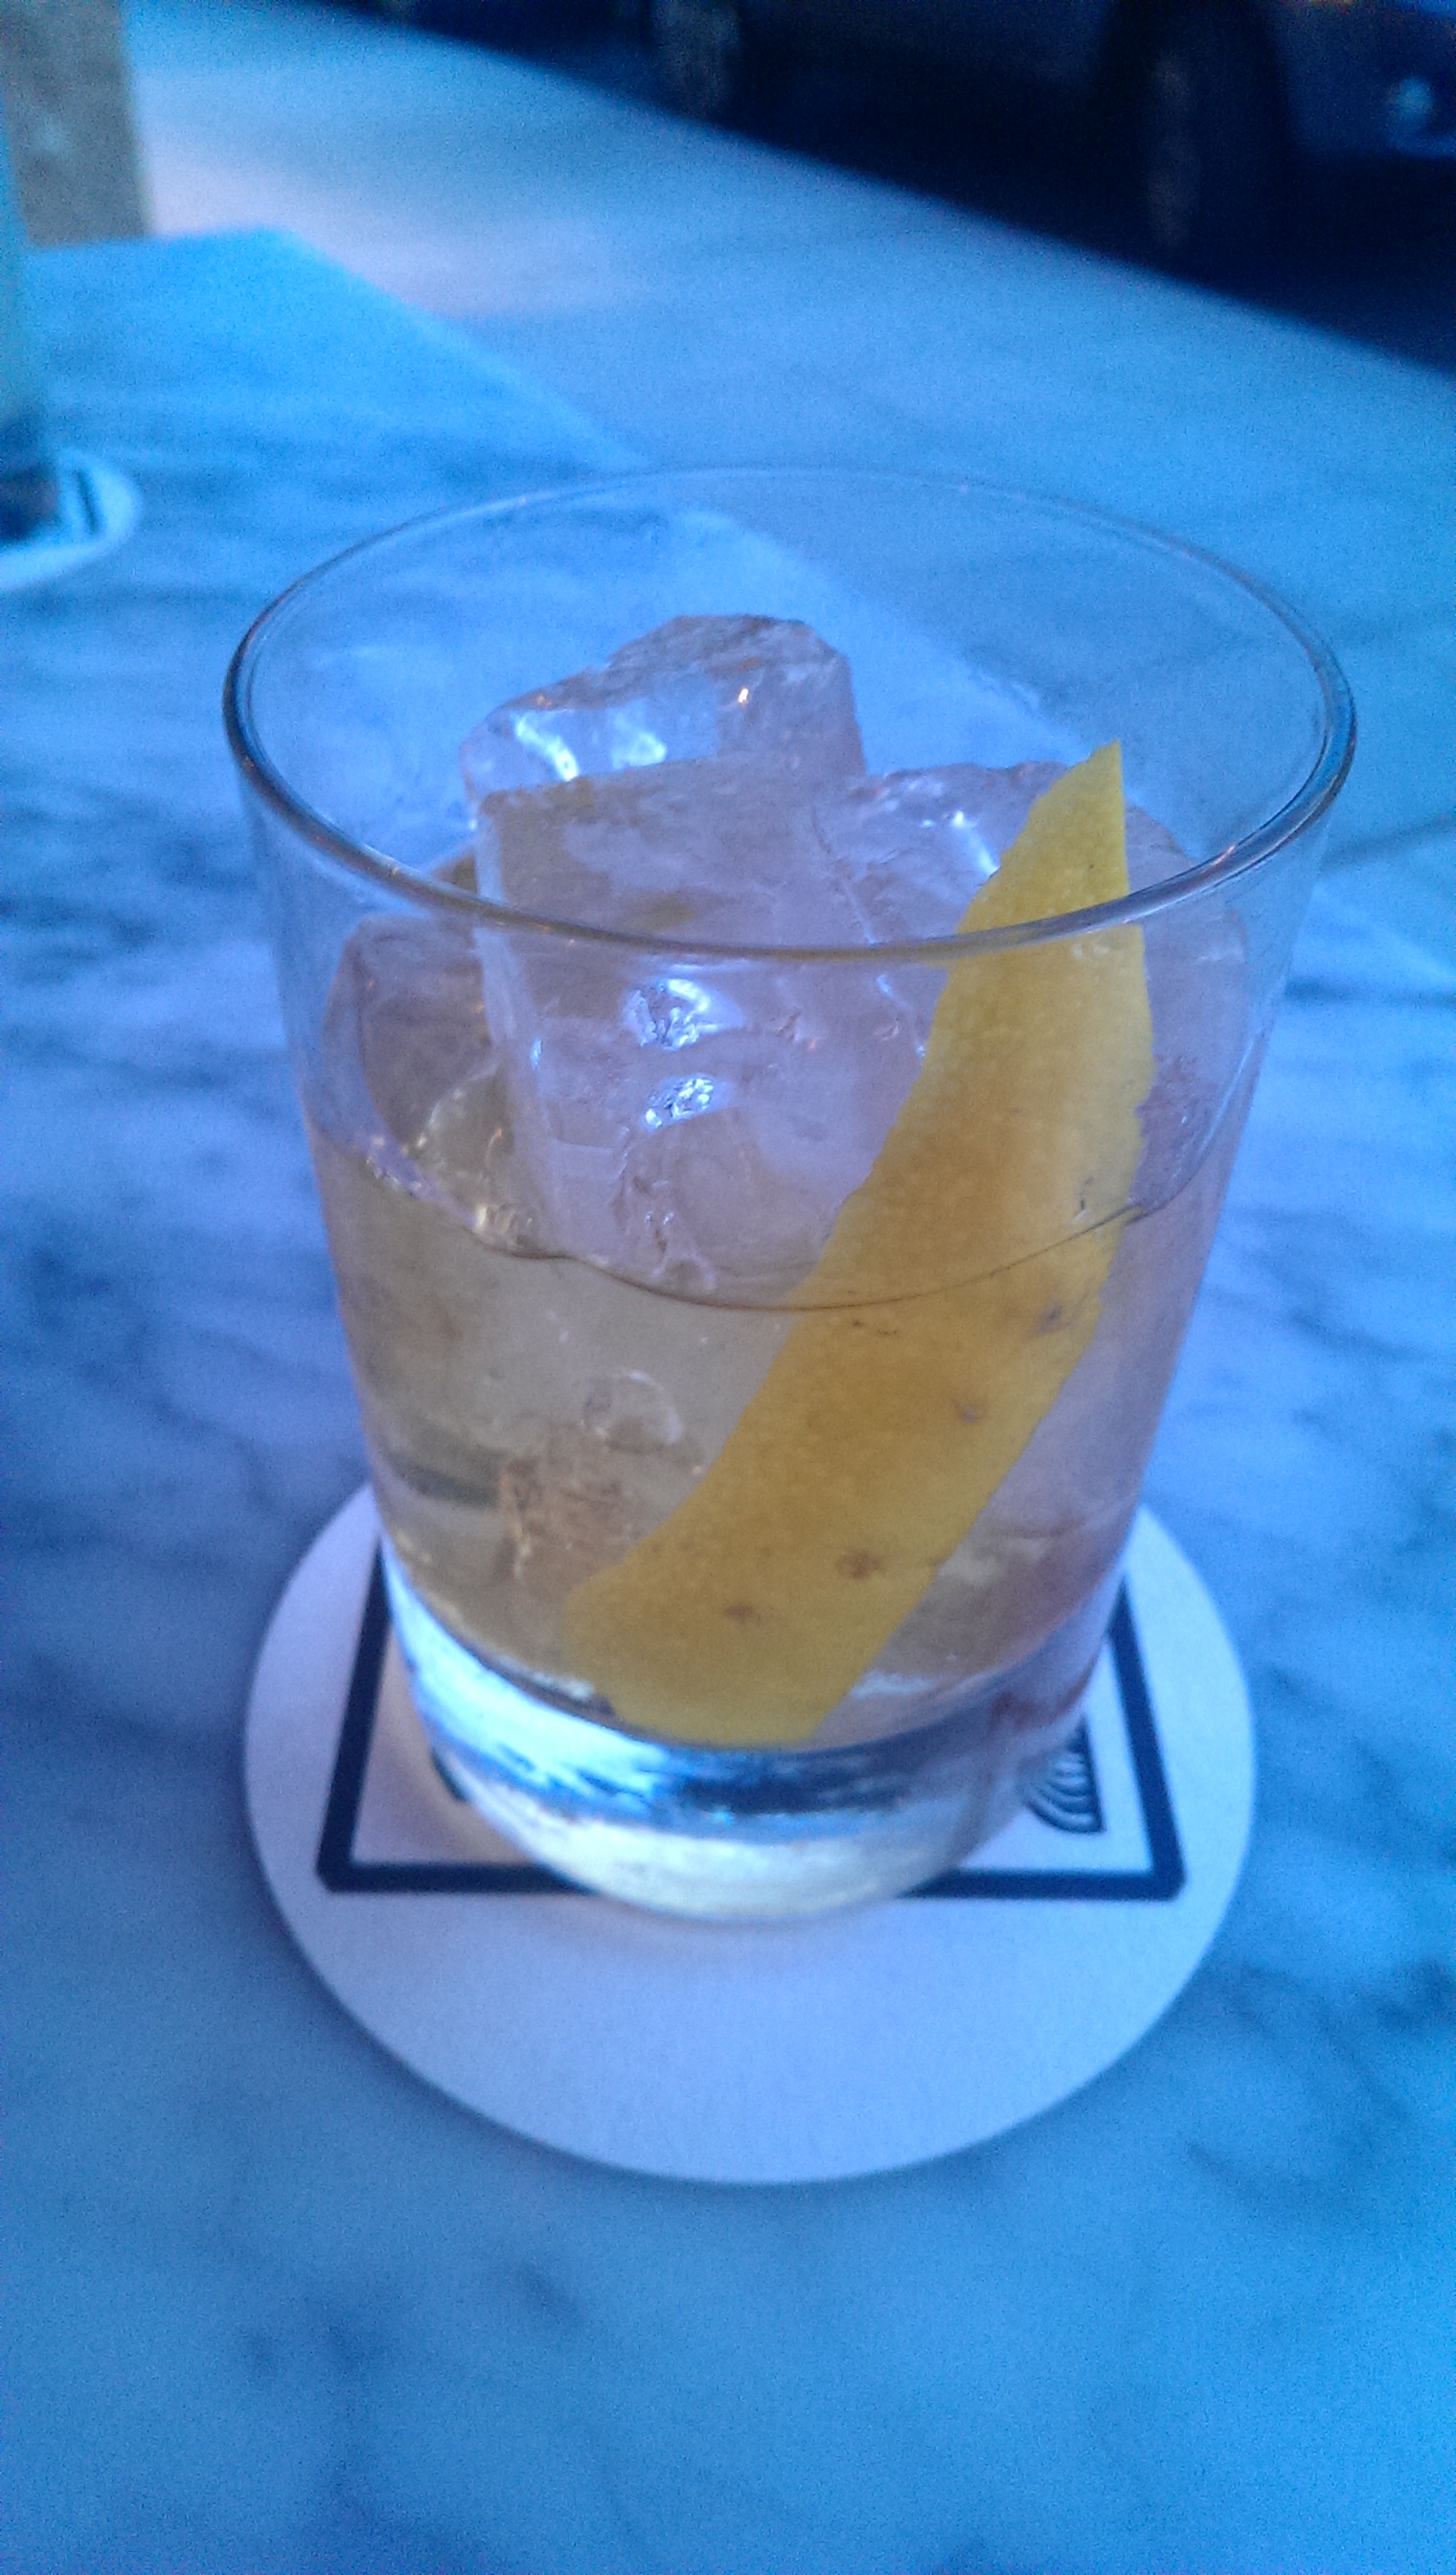 “The Daily Drink” brings you a must-try libation from our booze columnist